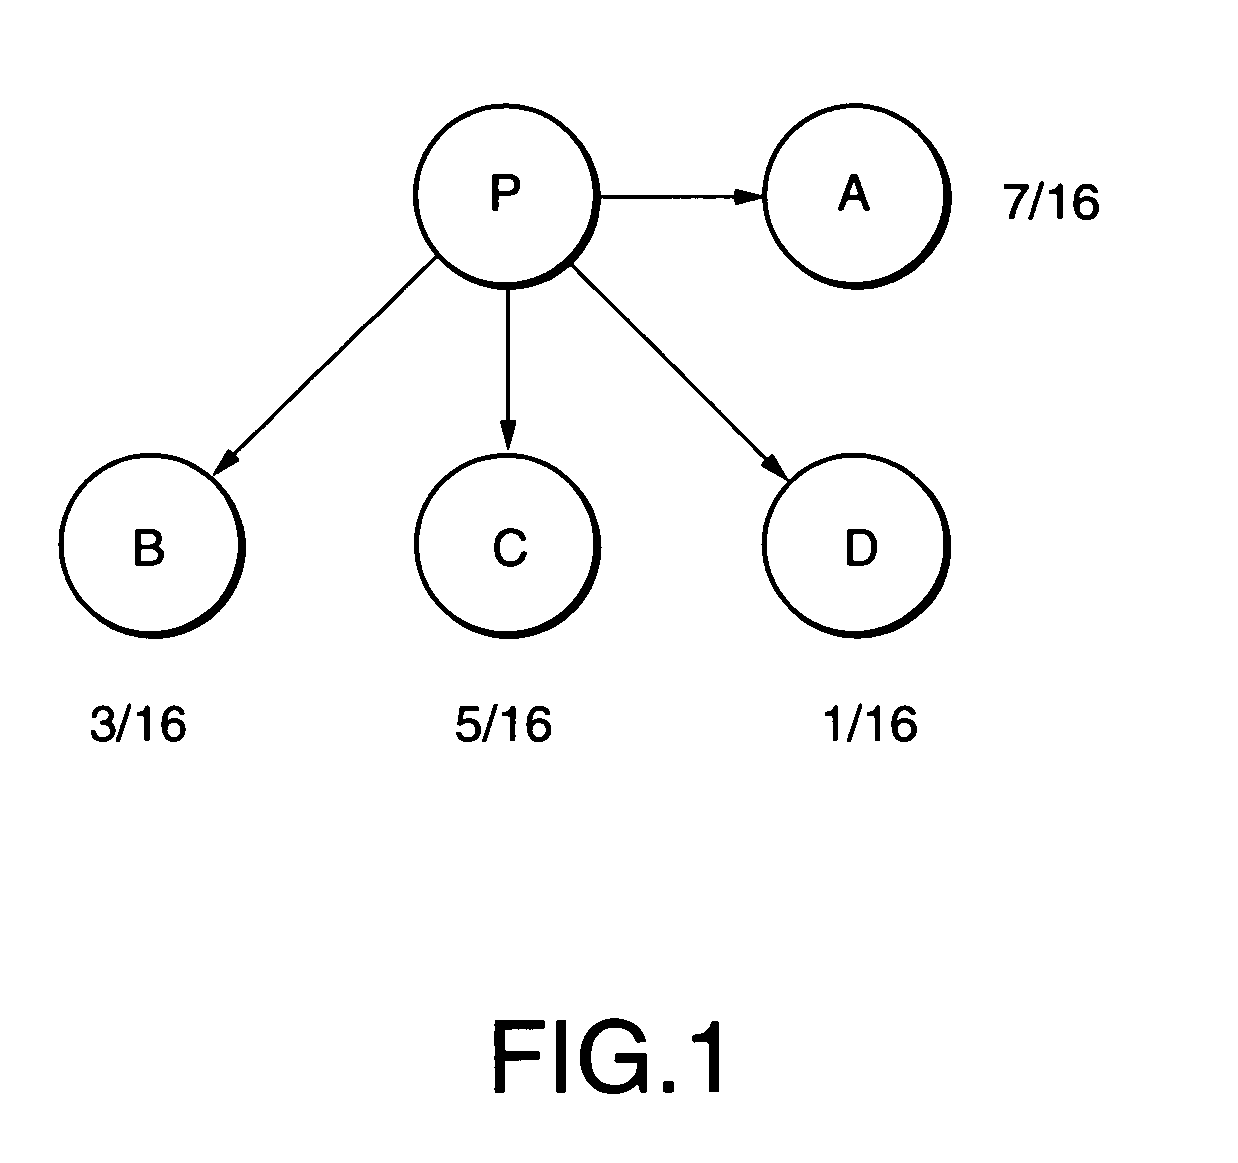 Image displaying with multi-gradation processing